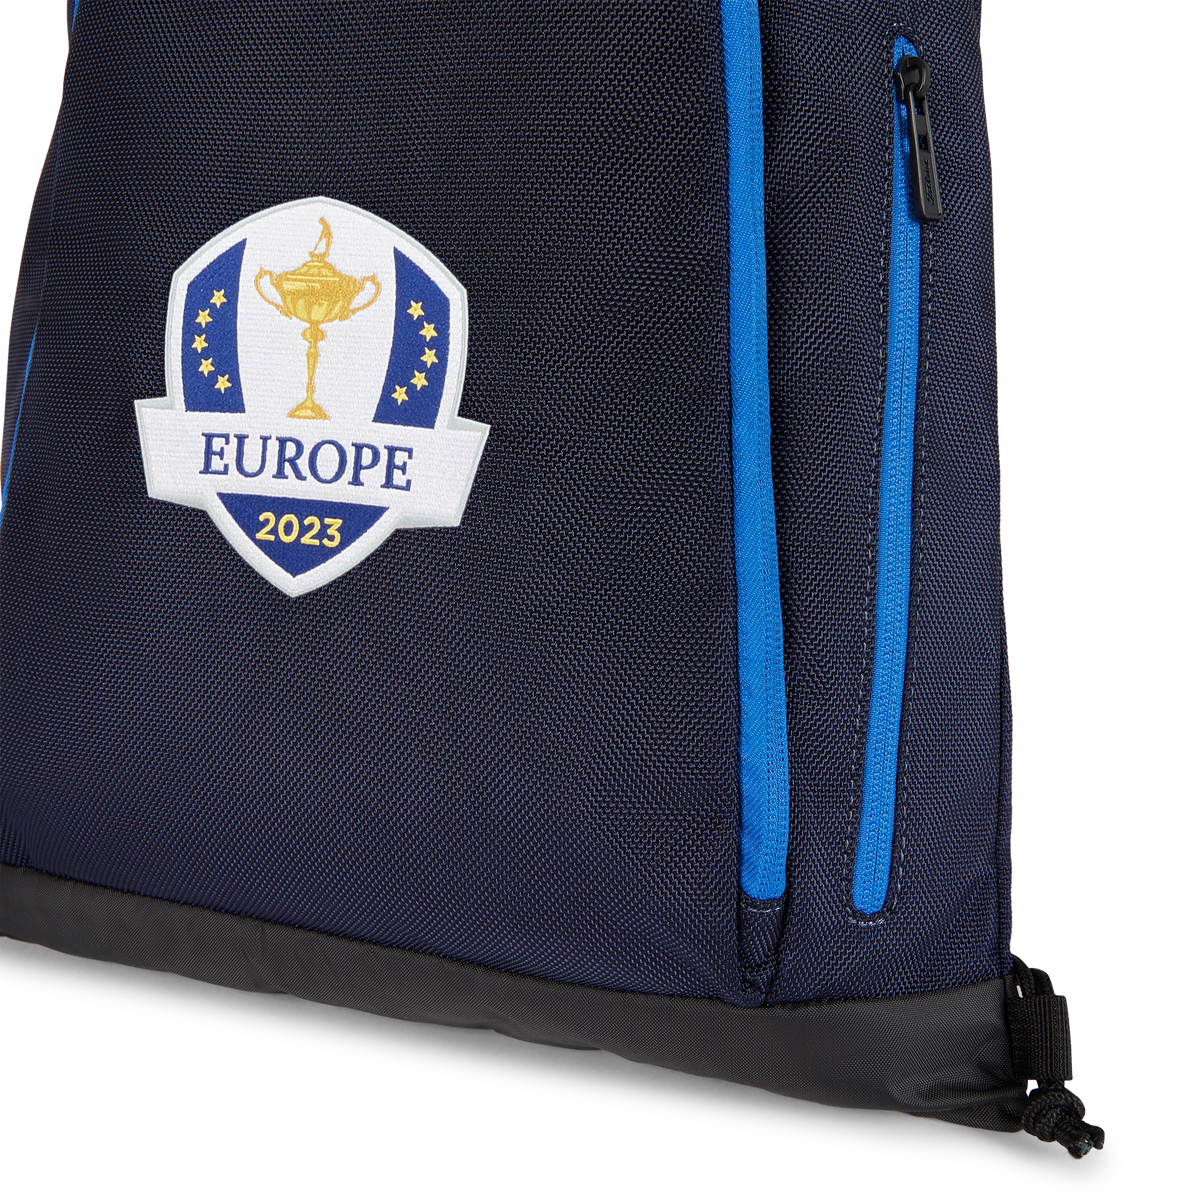 2023 Ryder Cup Titleist Team Europe Players Sackpack